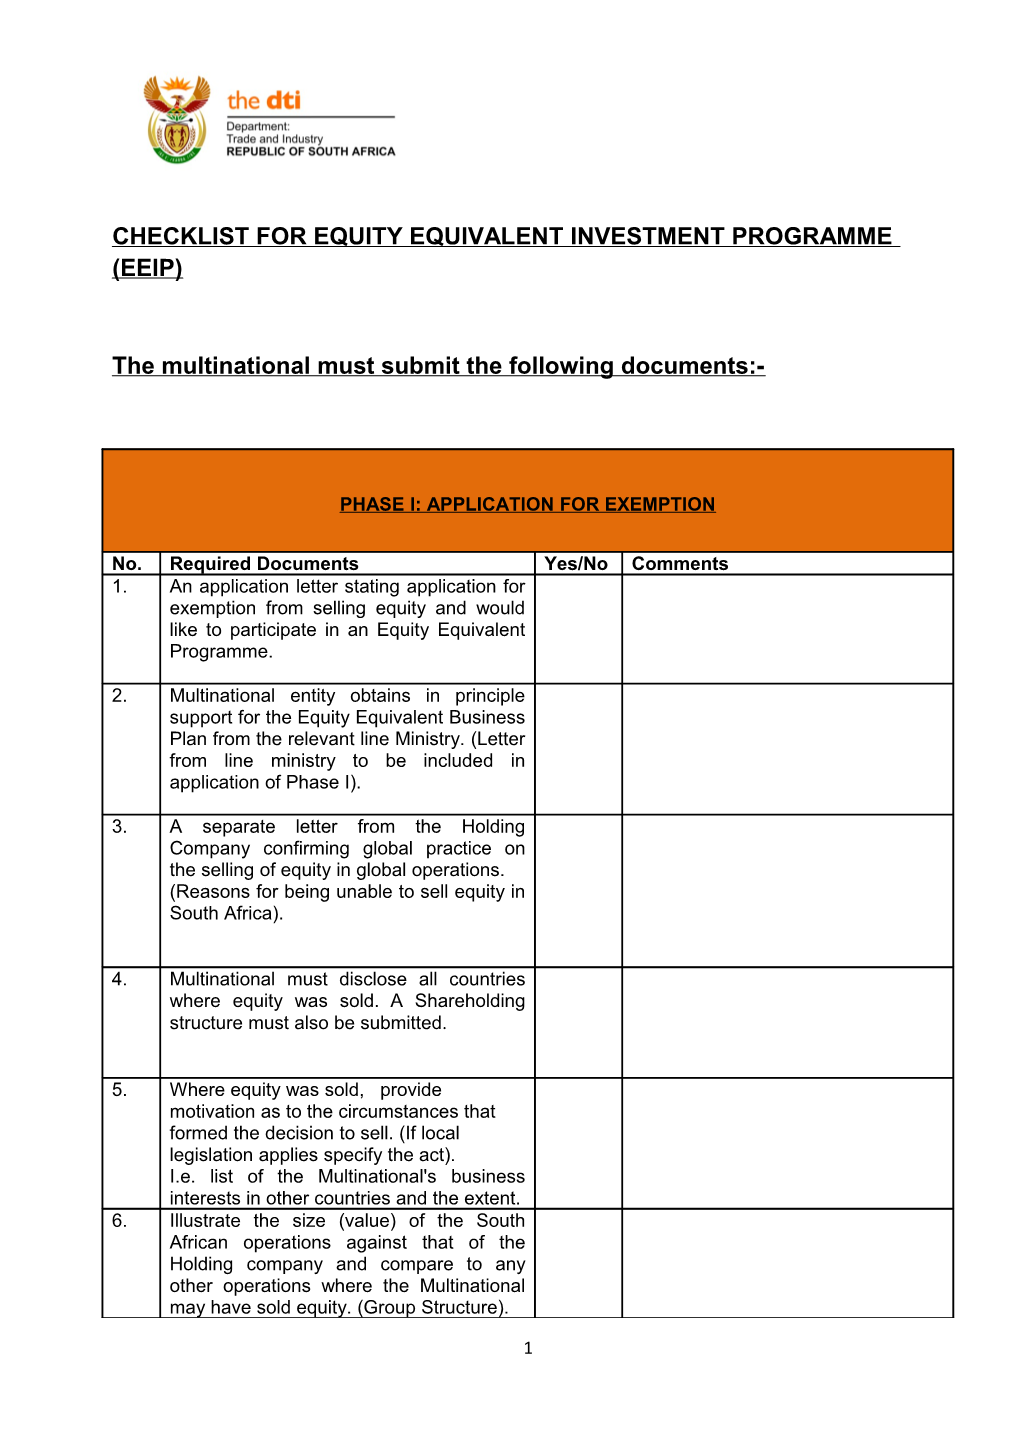 Checklist for Equity Equivalent Investment Programme (Eeip)